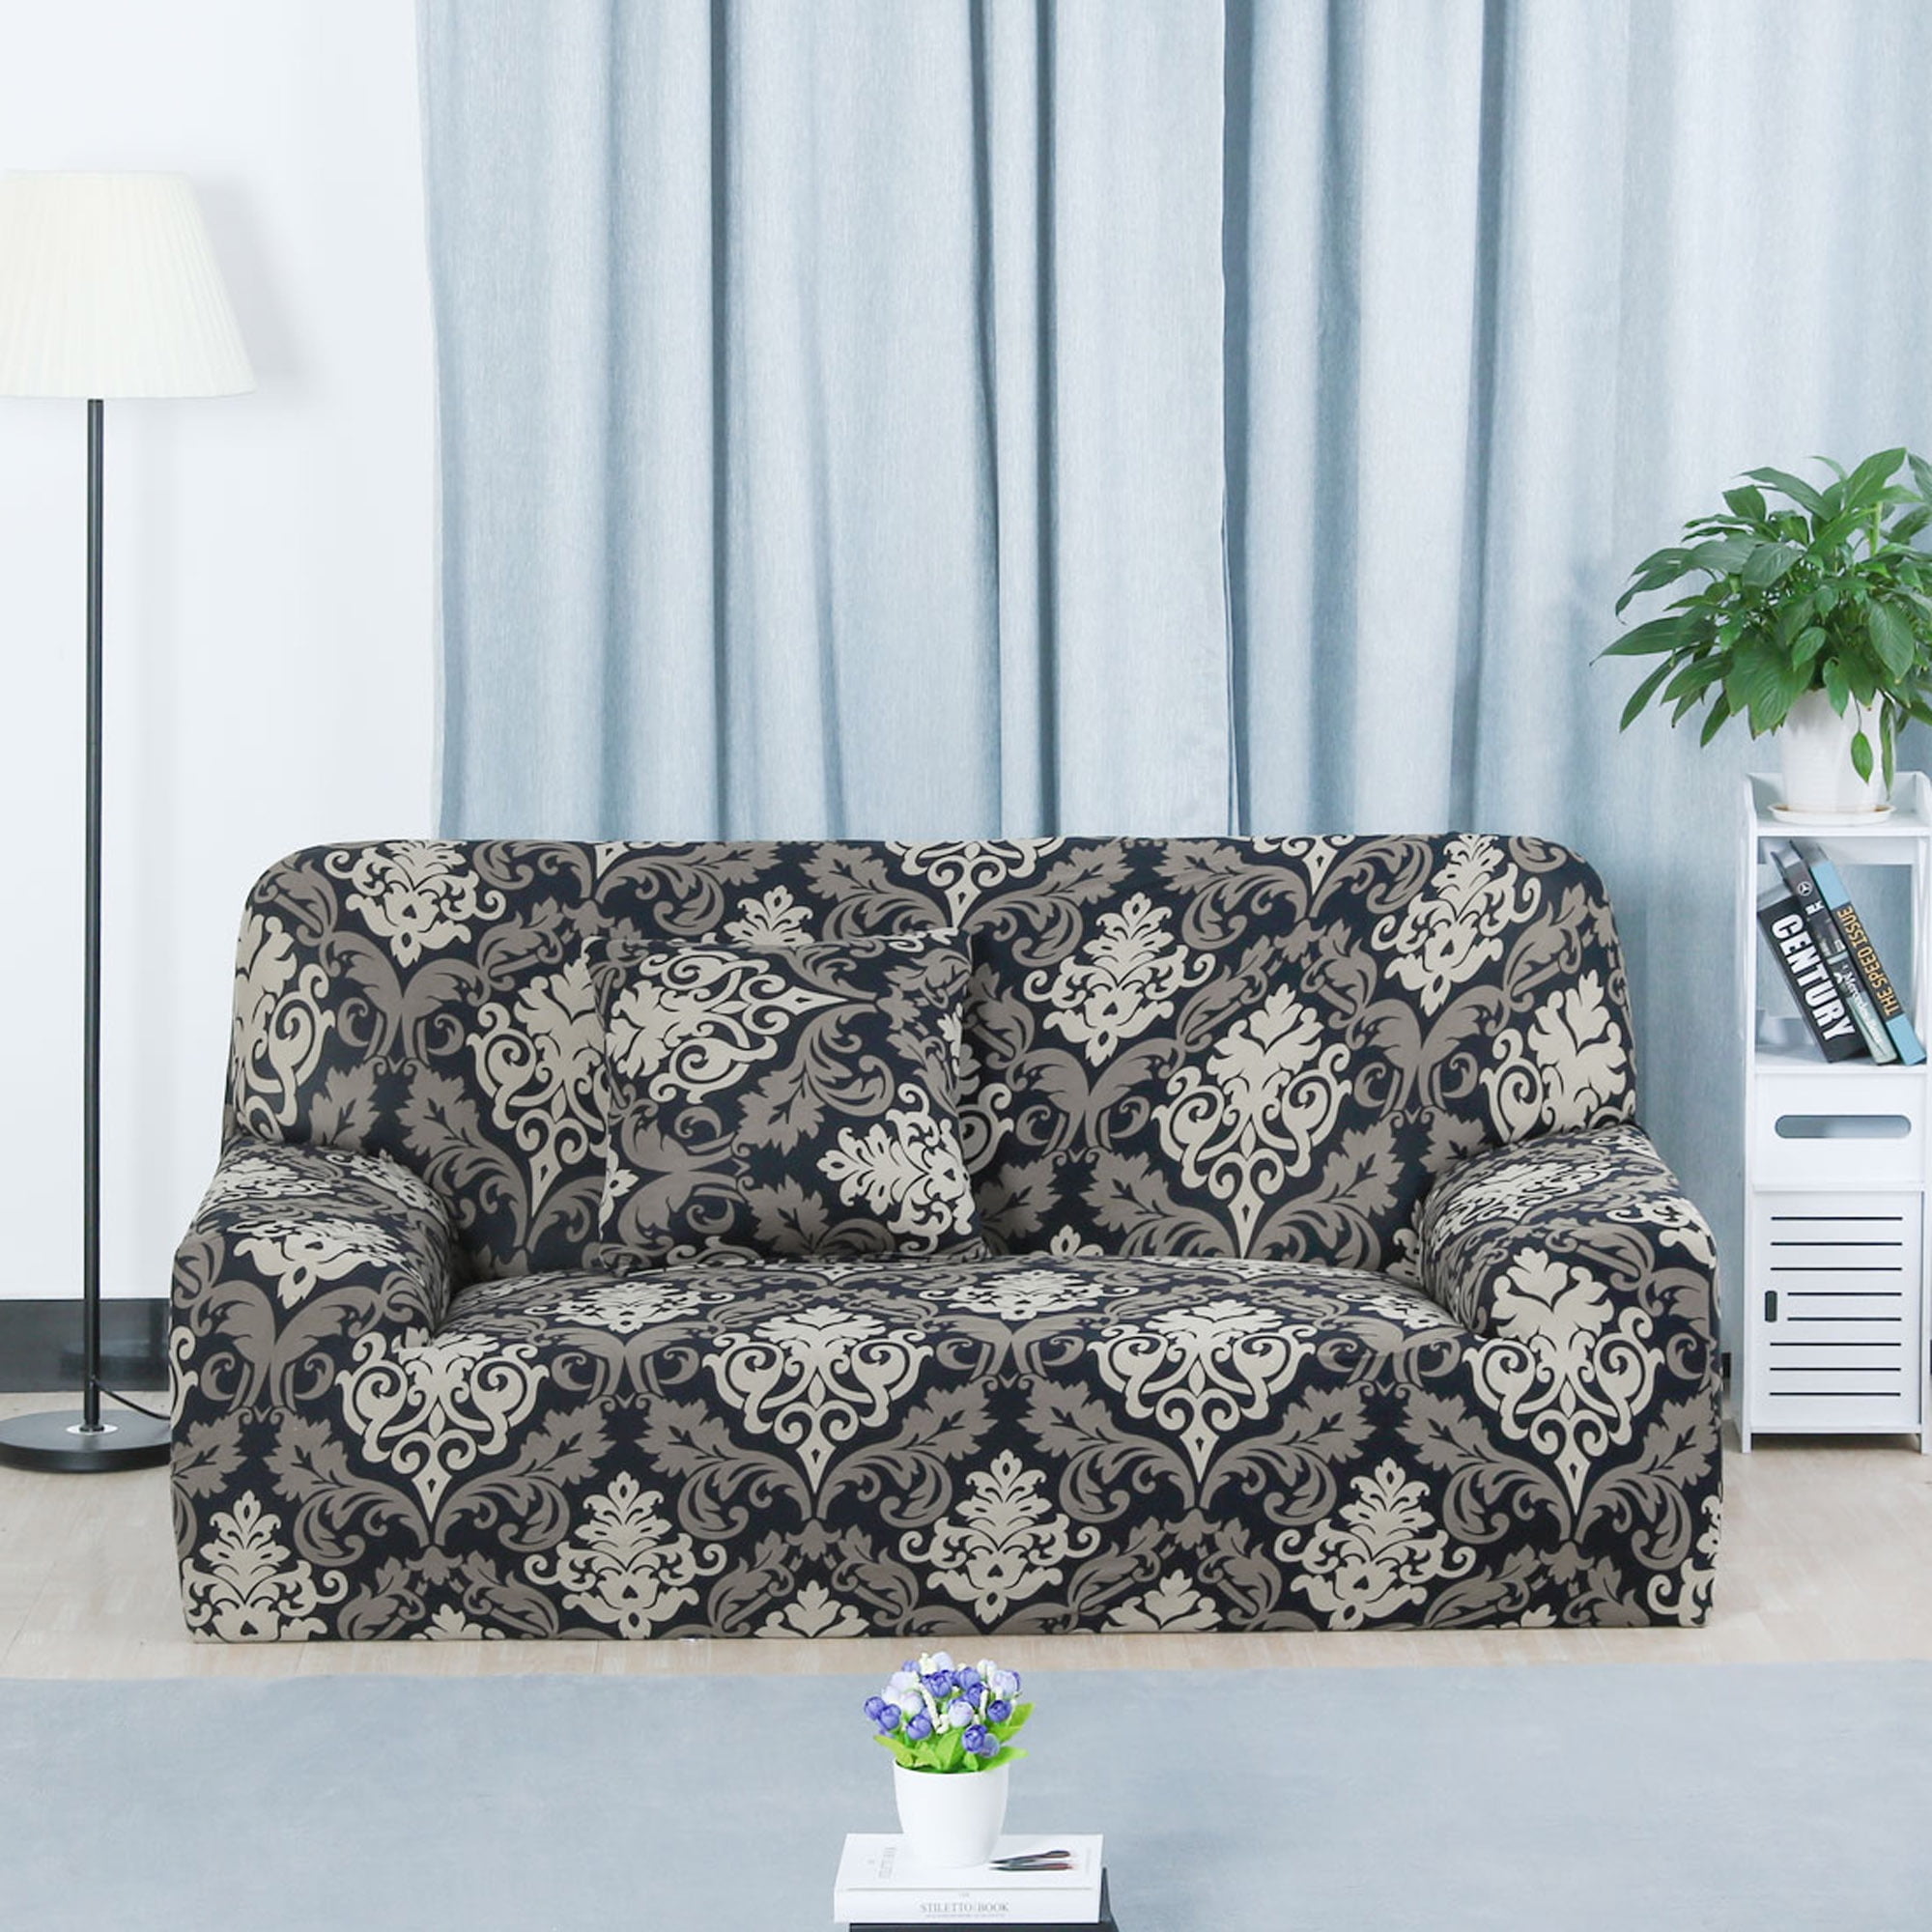 PiccoCasa Stretch Sofa Cover Printed Couch Covers Elastic Universal Sofa  Furniture Slipcovers for 1 2 3 4 Cushion Couches Gray 35-51 inches